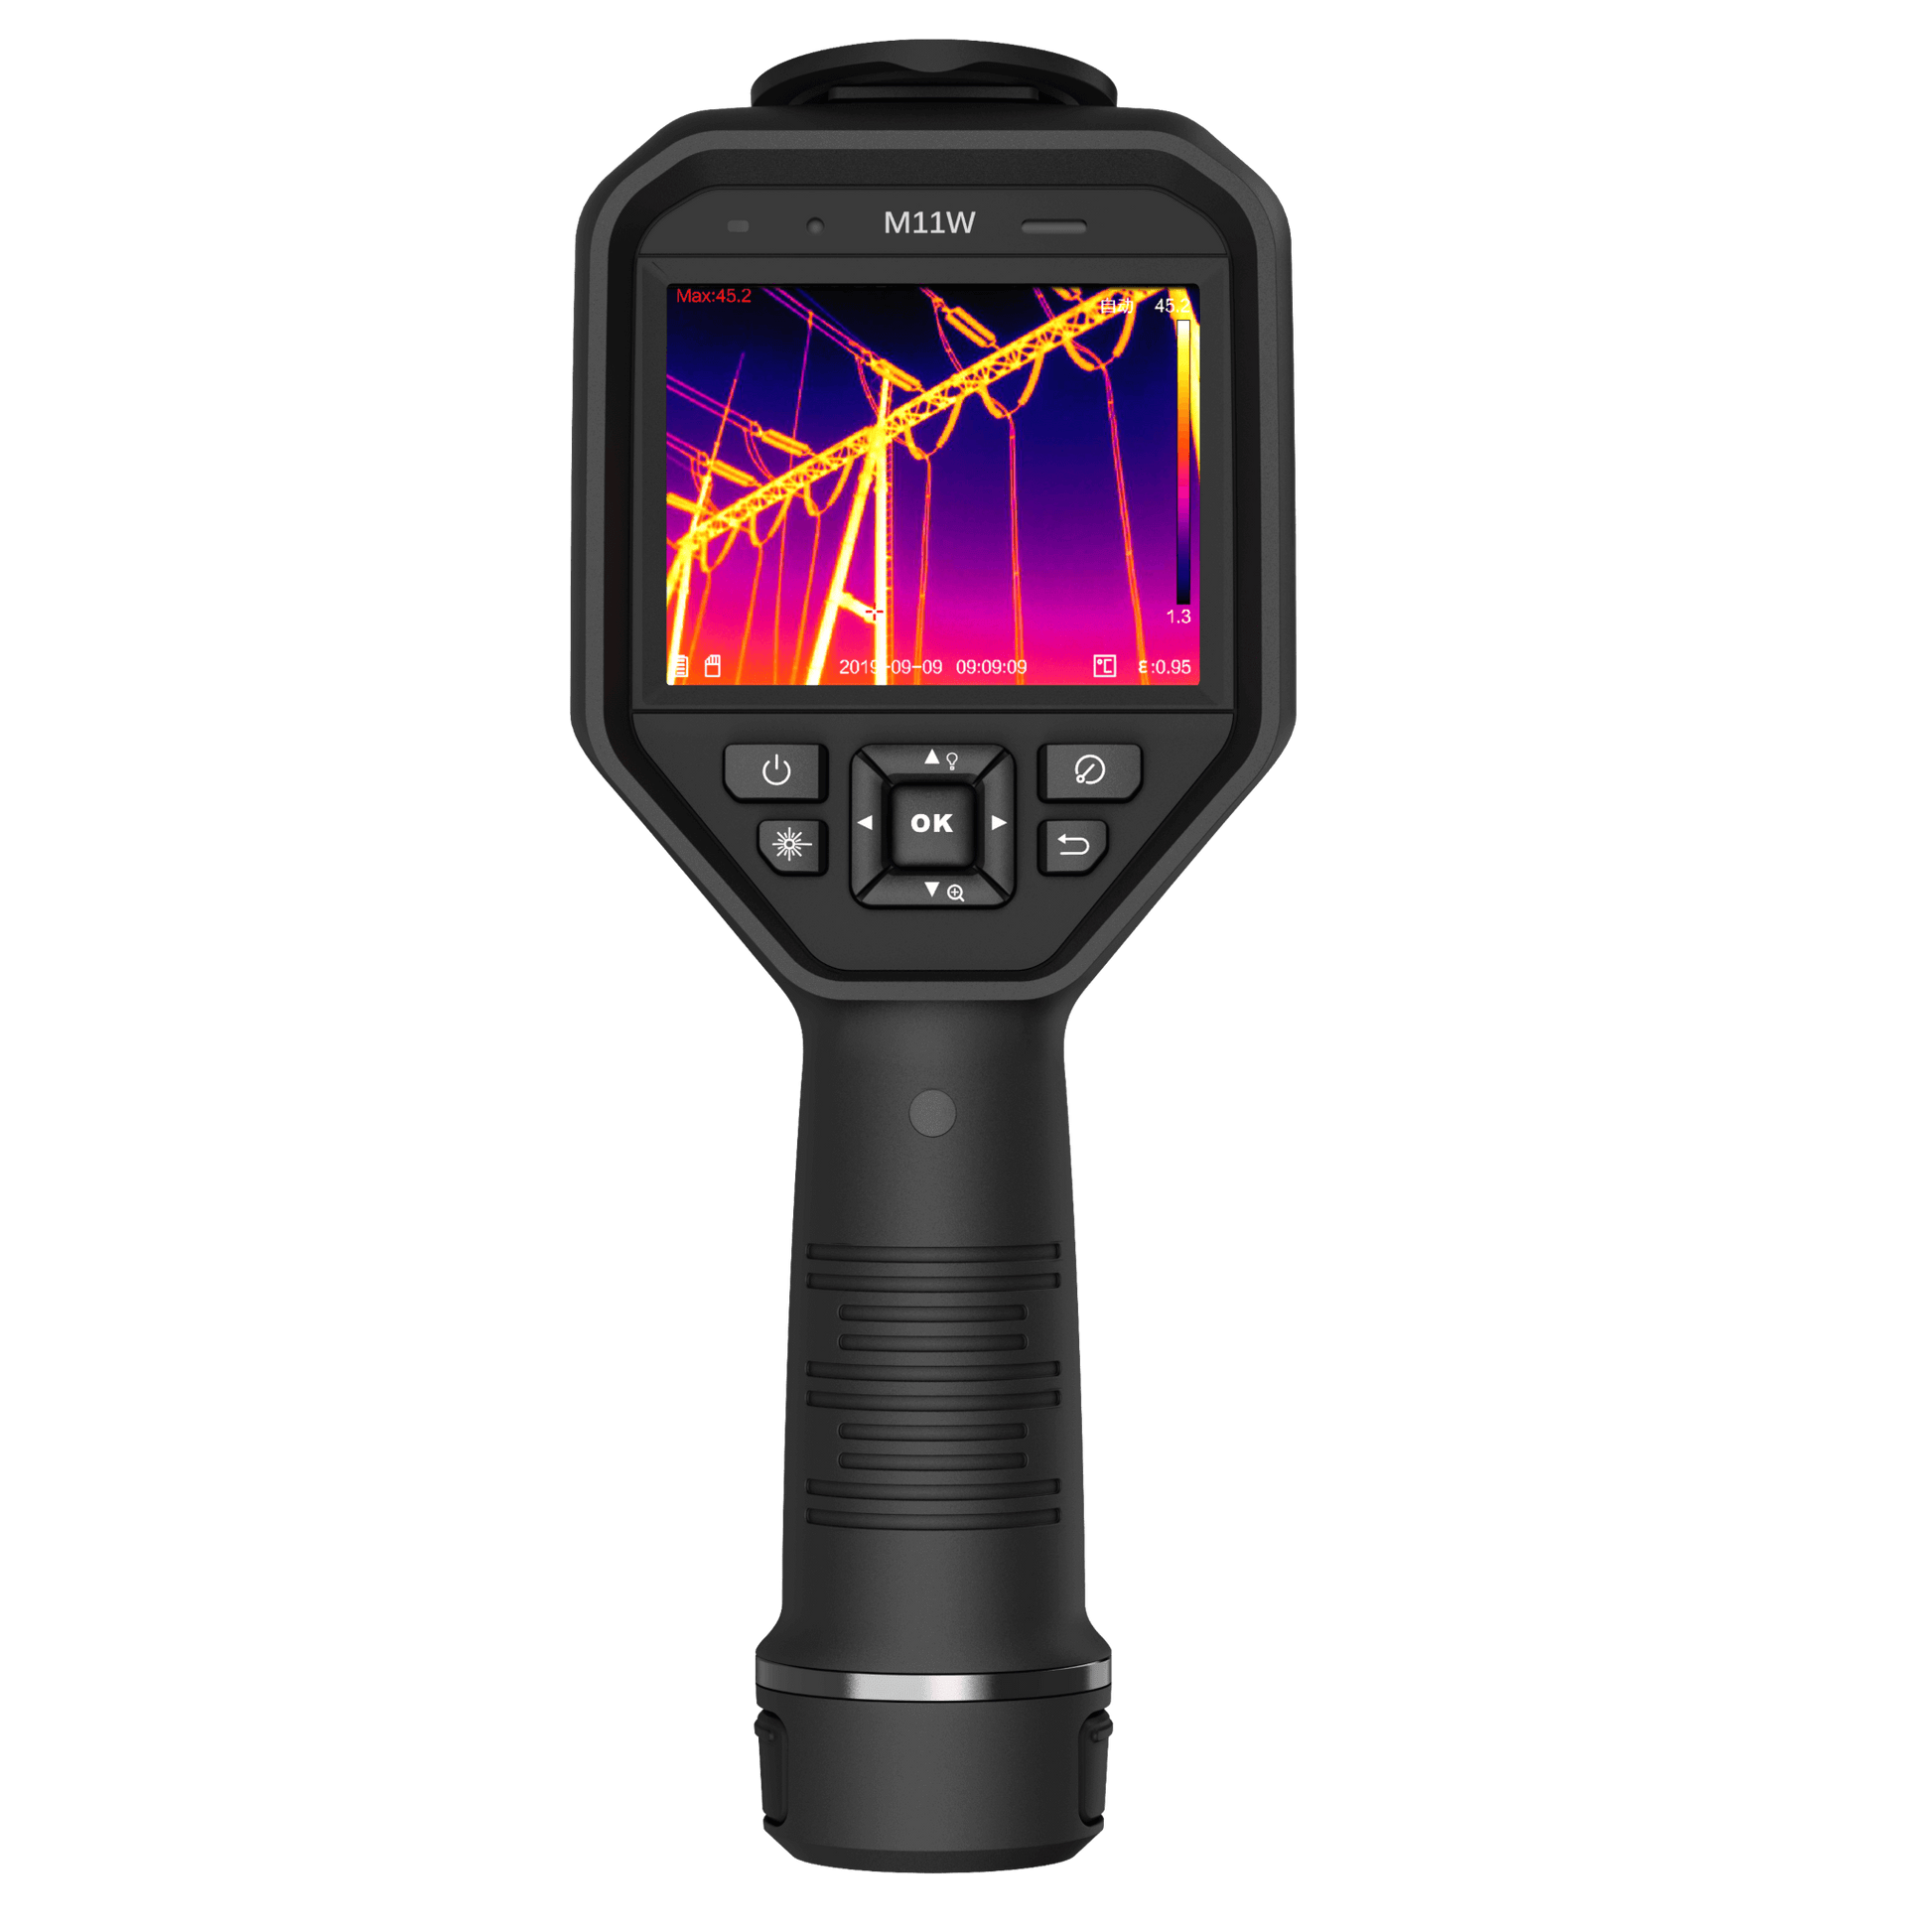 HikMicro M11W Handheld Thermography Camera alternative screen view on a transparent background